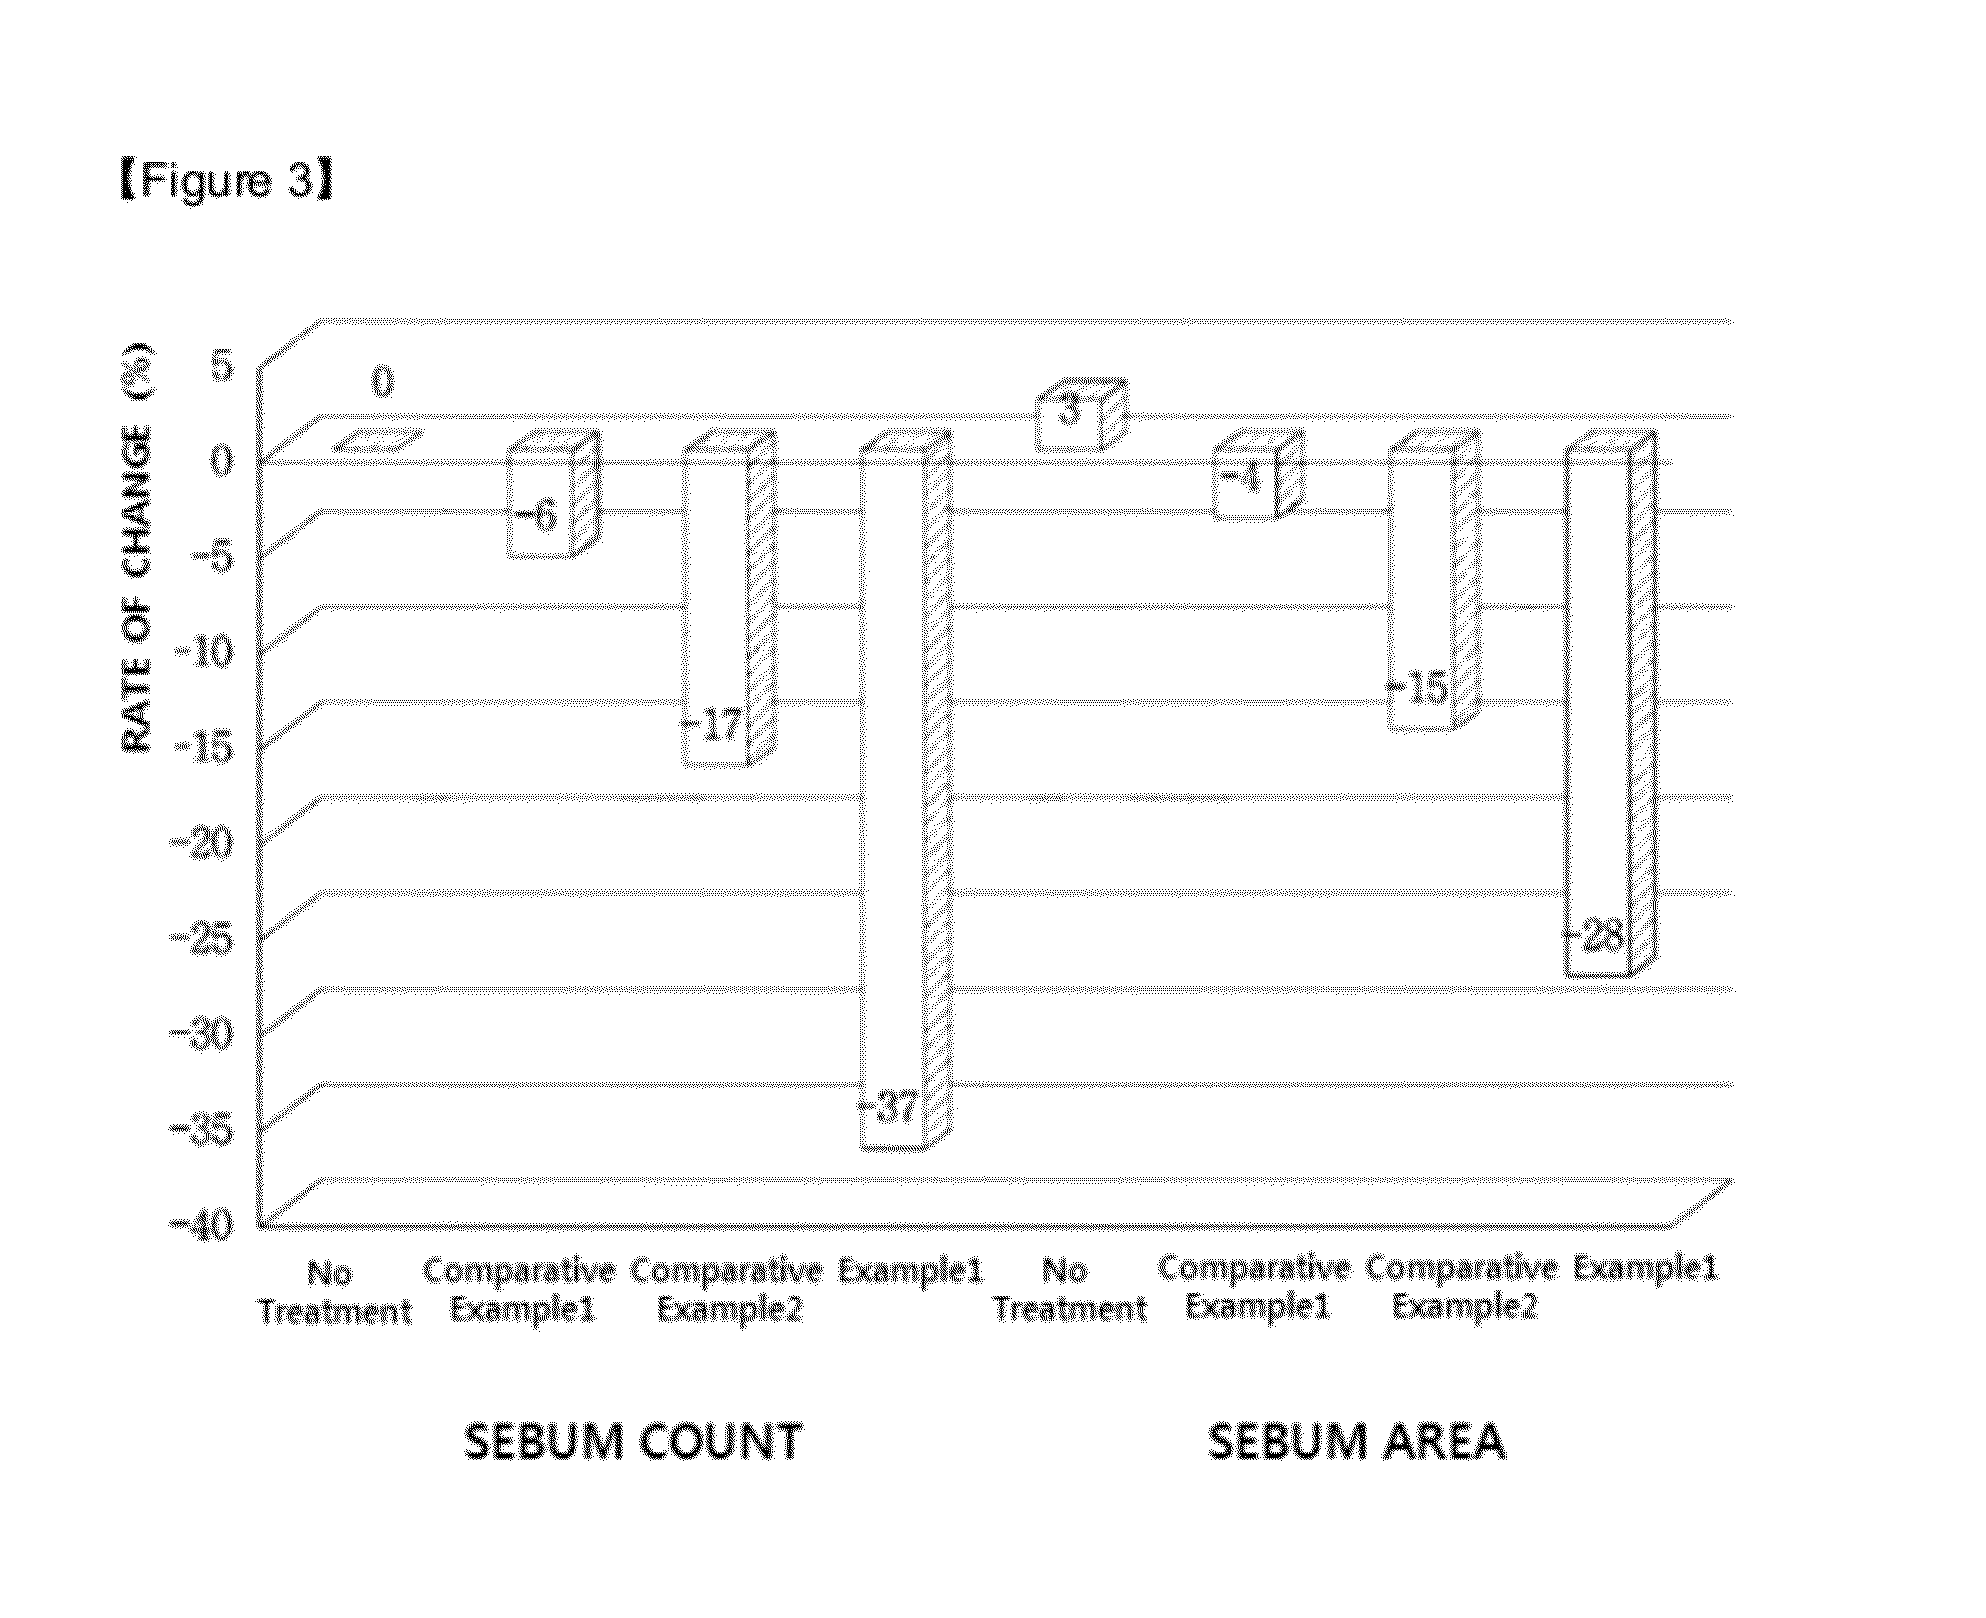 Composition for skin improvement comprising hexamidines and retinoids